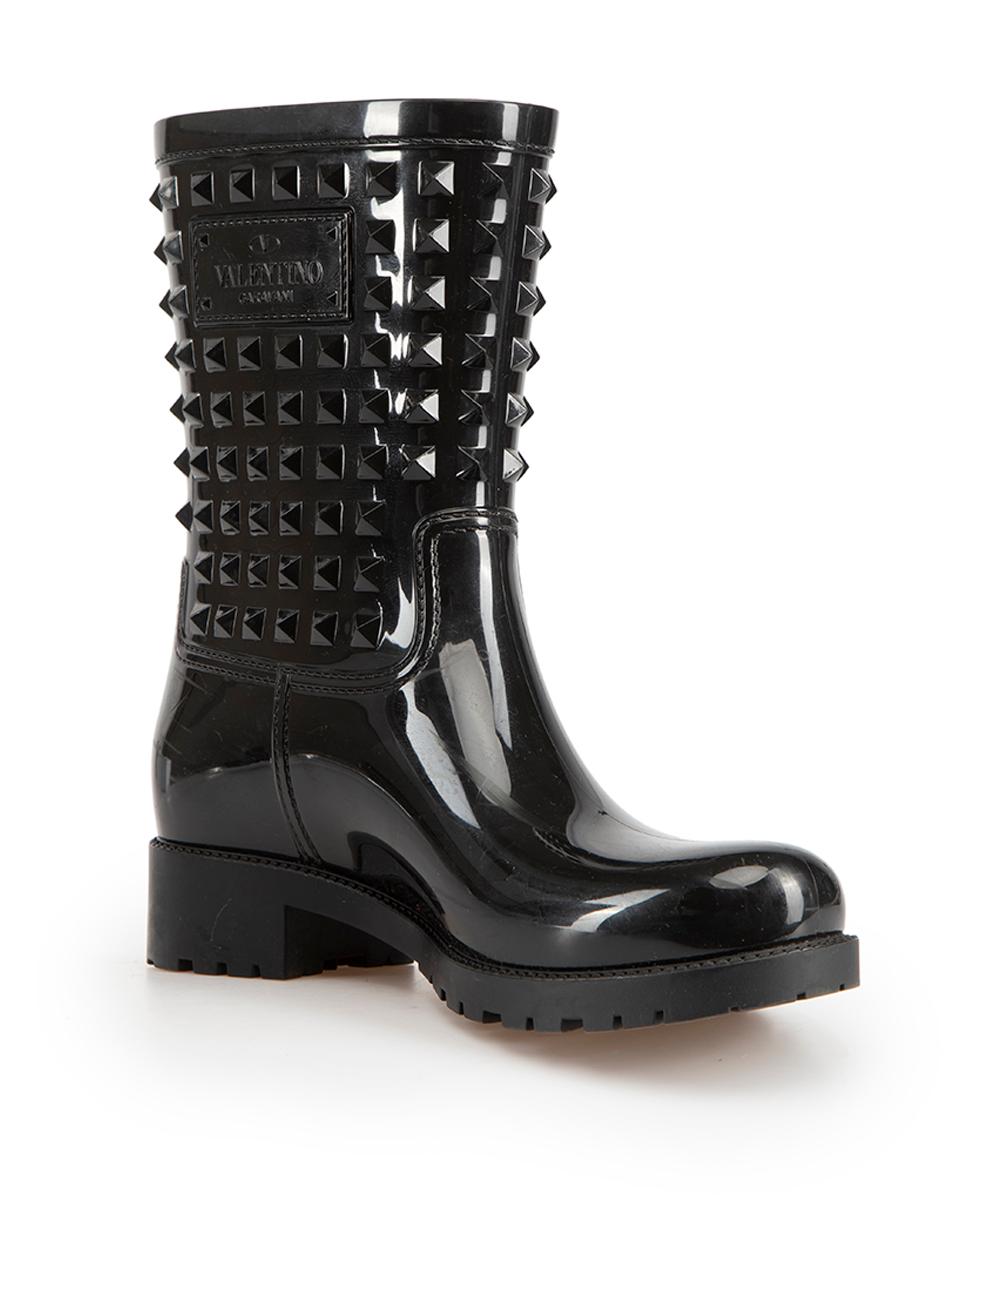 CONDITION is Very good. Minimal wear to boots is evident. Minimal wear to both sides and toes of both boots with light scratched to the rubber on this used Valentino designer resale item.
 
Details
Black
Rubber
Rain boots
Rockstud detail
Round